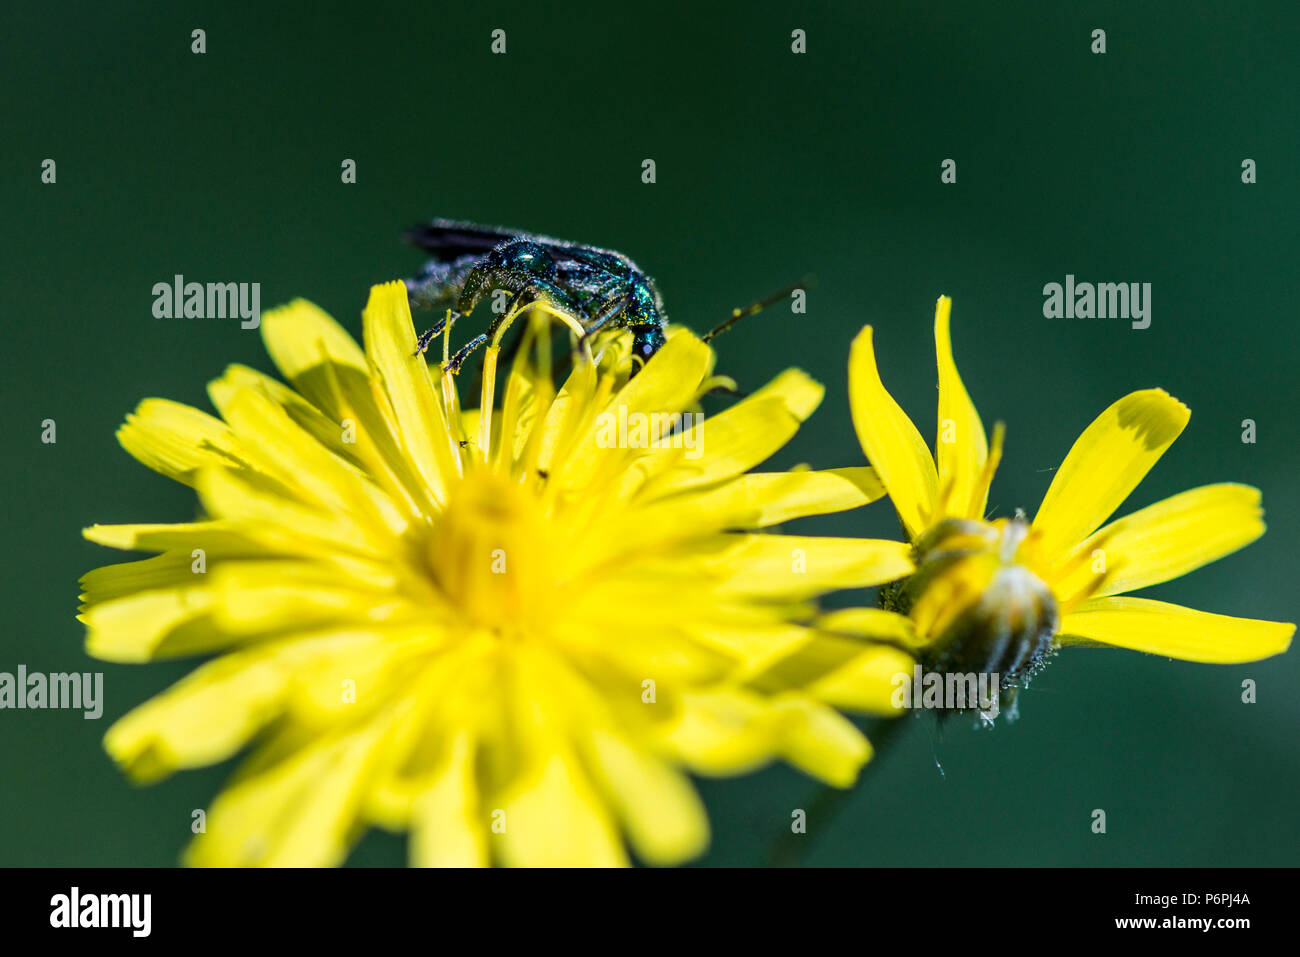 A male swollen-thighed Beetle (Oedemera nobilis) on the flower of a smooth hawksbeard (Crepis capillaris) Stock Photo